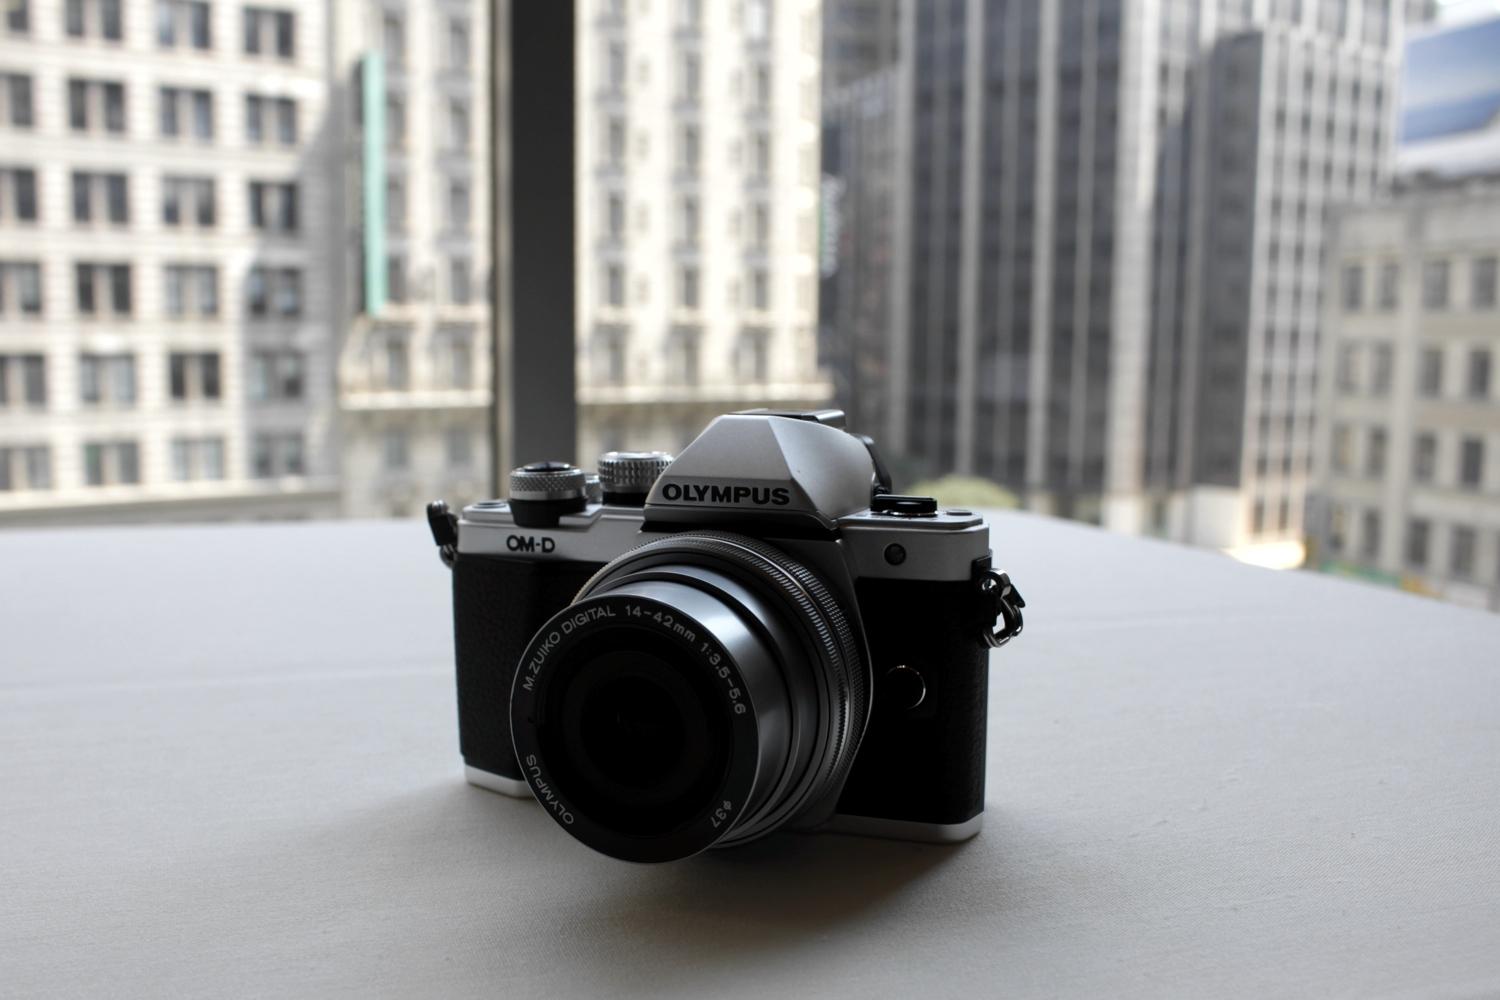 olympus gives entry level om d e m10 mirrorless camera big upgrades e10mkii 14